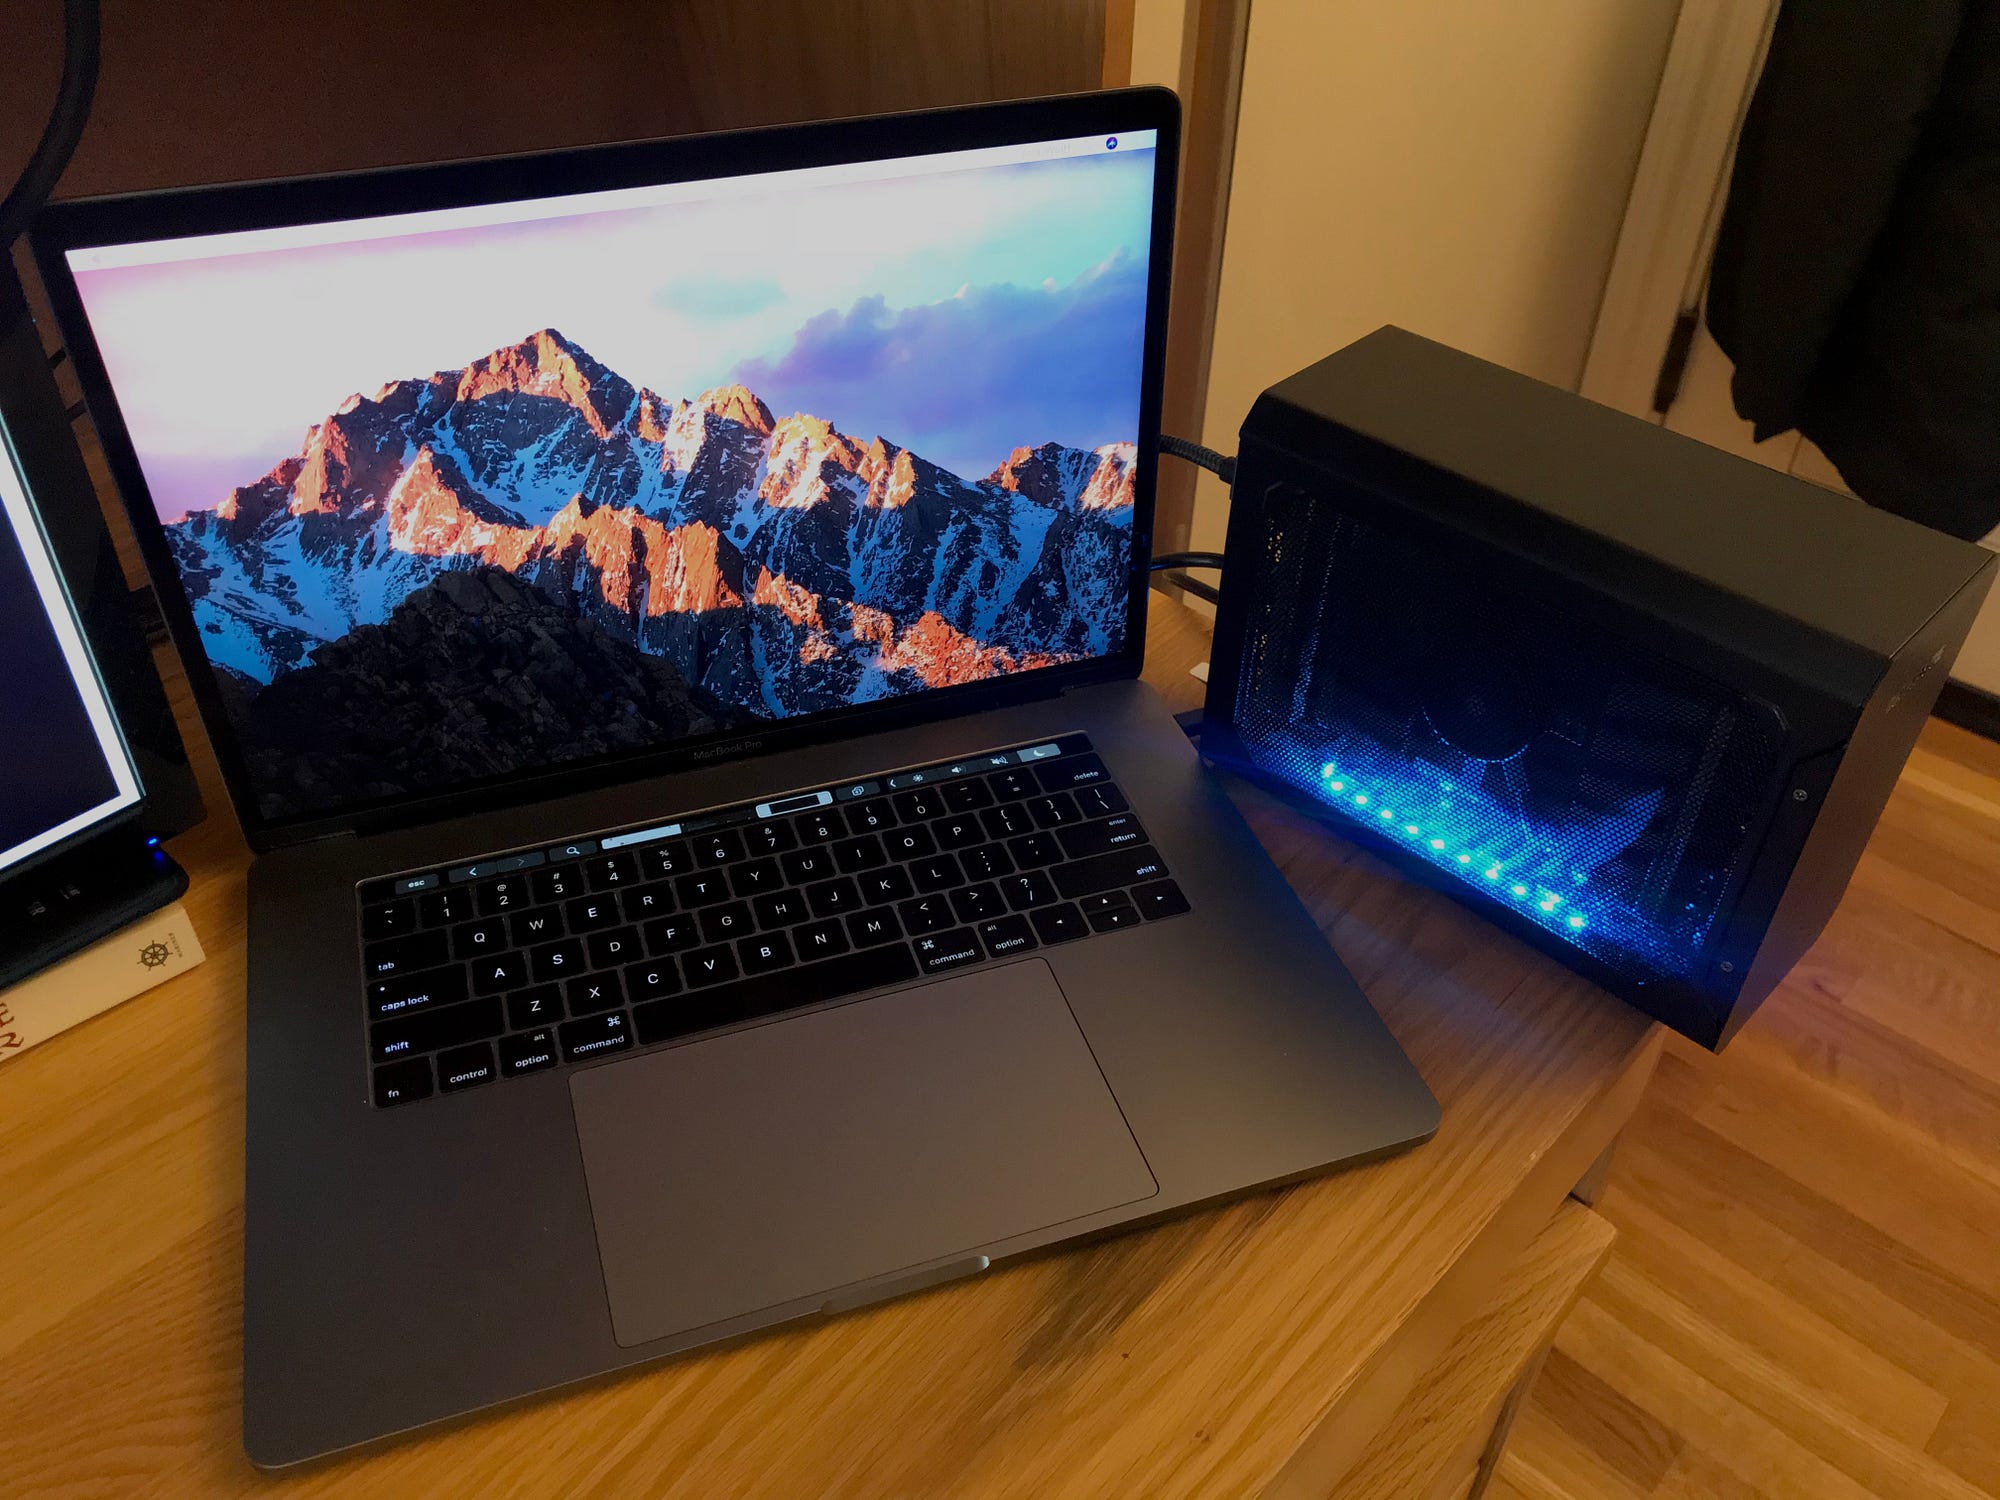 Hands-on: eGPU enclosure + GTX 1080 Ti w/ MacBook Pro - Pascal works w/  macOS, but truly shines on Windows [Video] - 9to5Mac